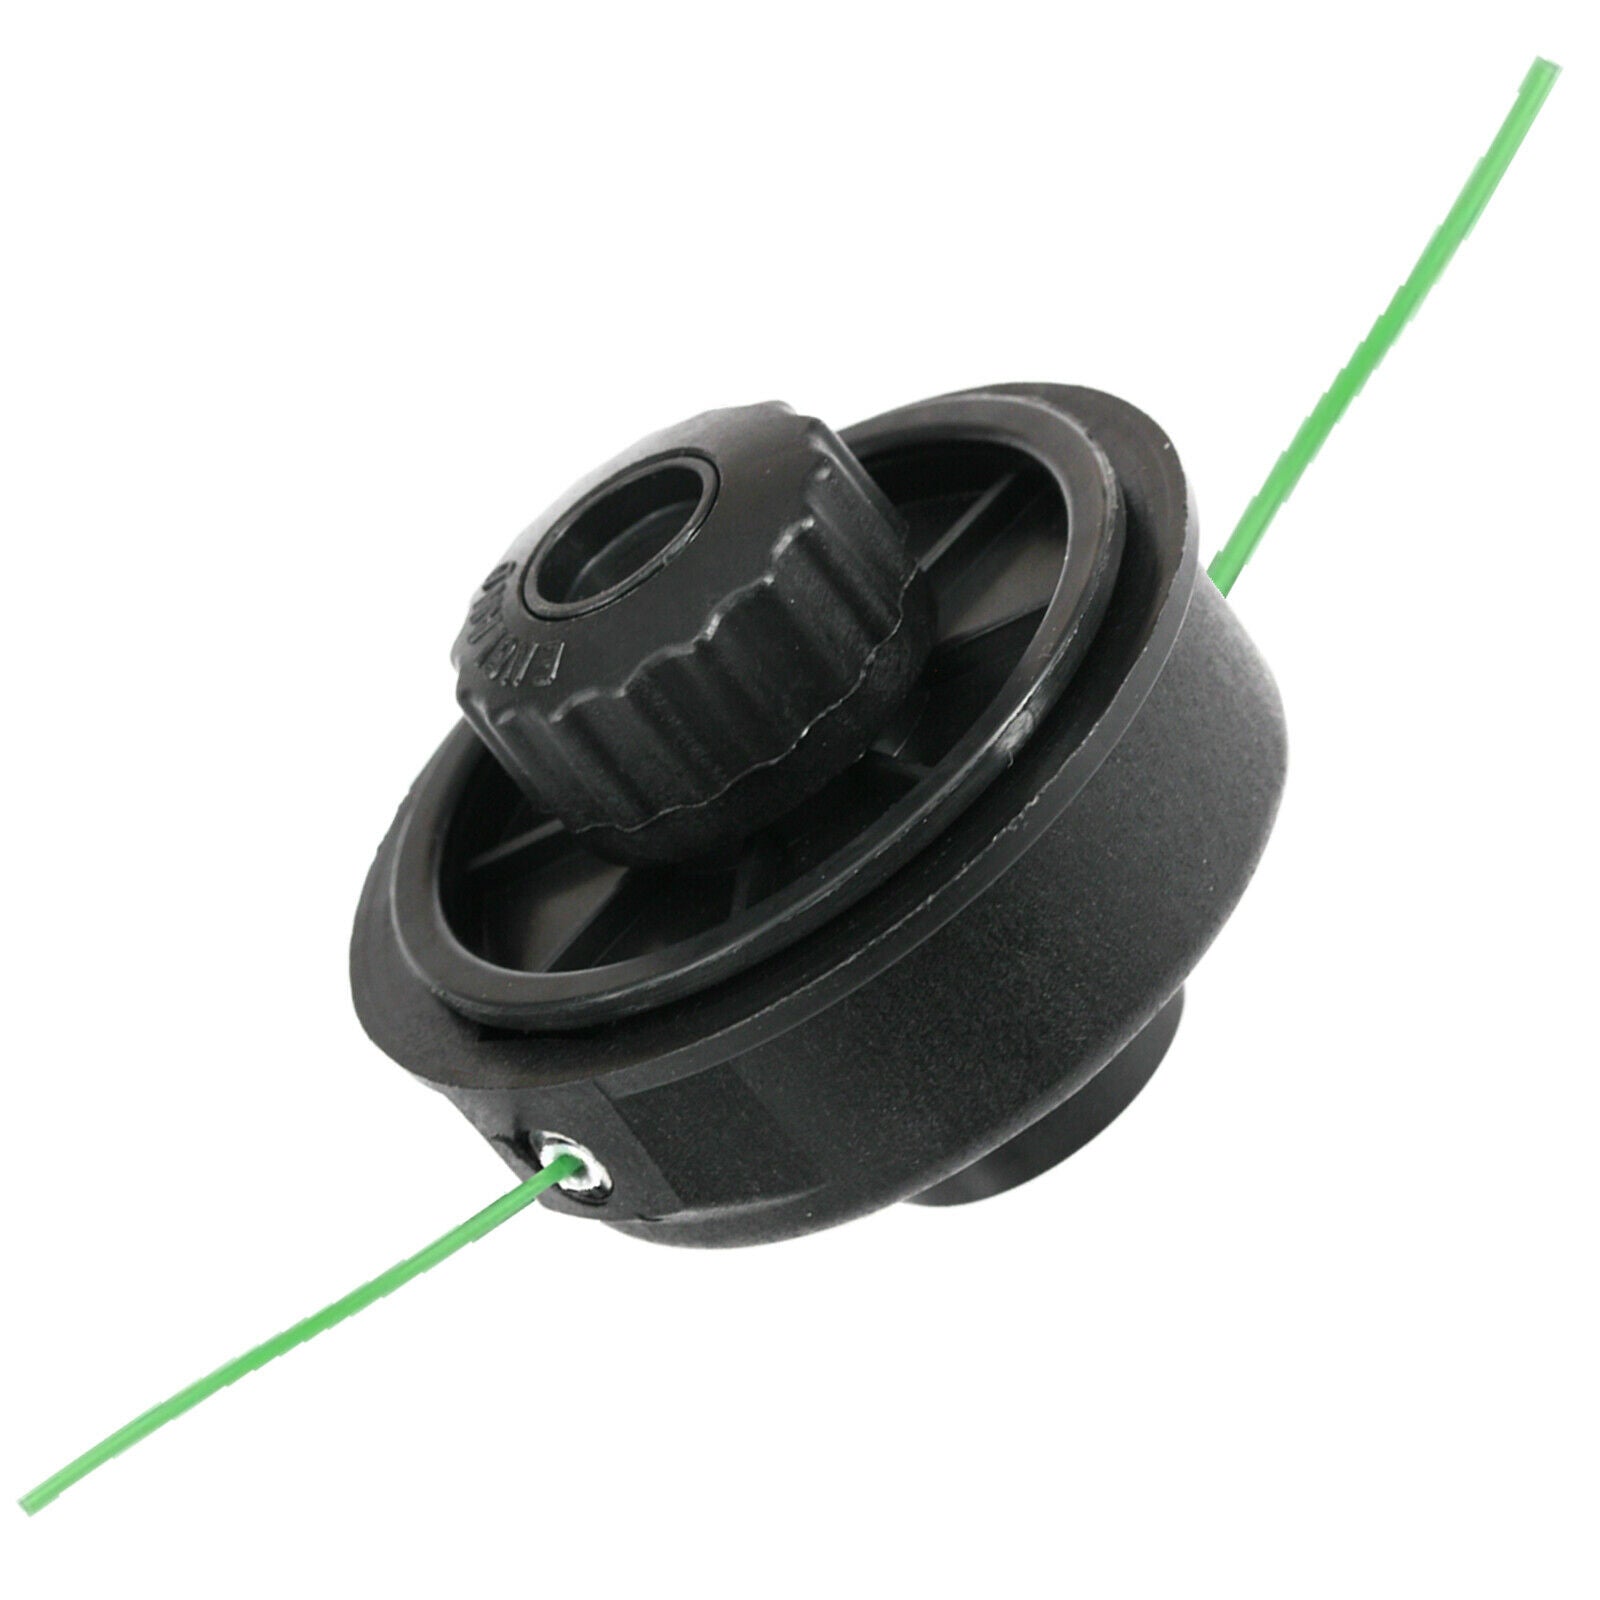 Double Twin Feed Compact Head & Spool for Sovereign Strimmer Trimmer